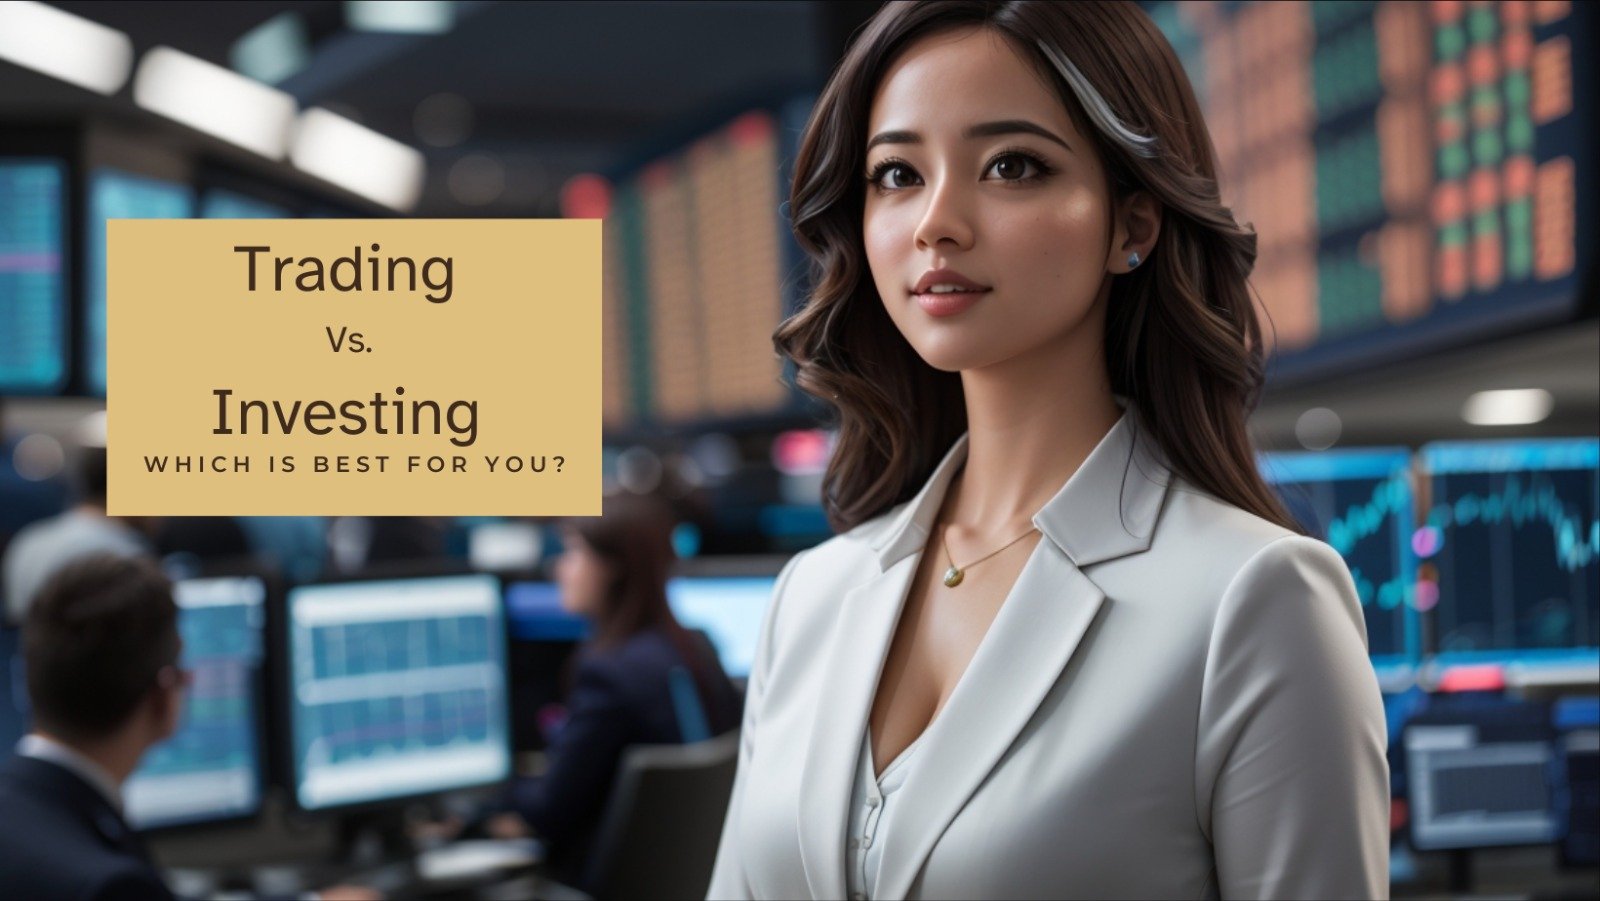 Trading Vs. Investing, Which is Best for You?